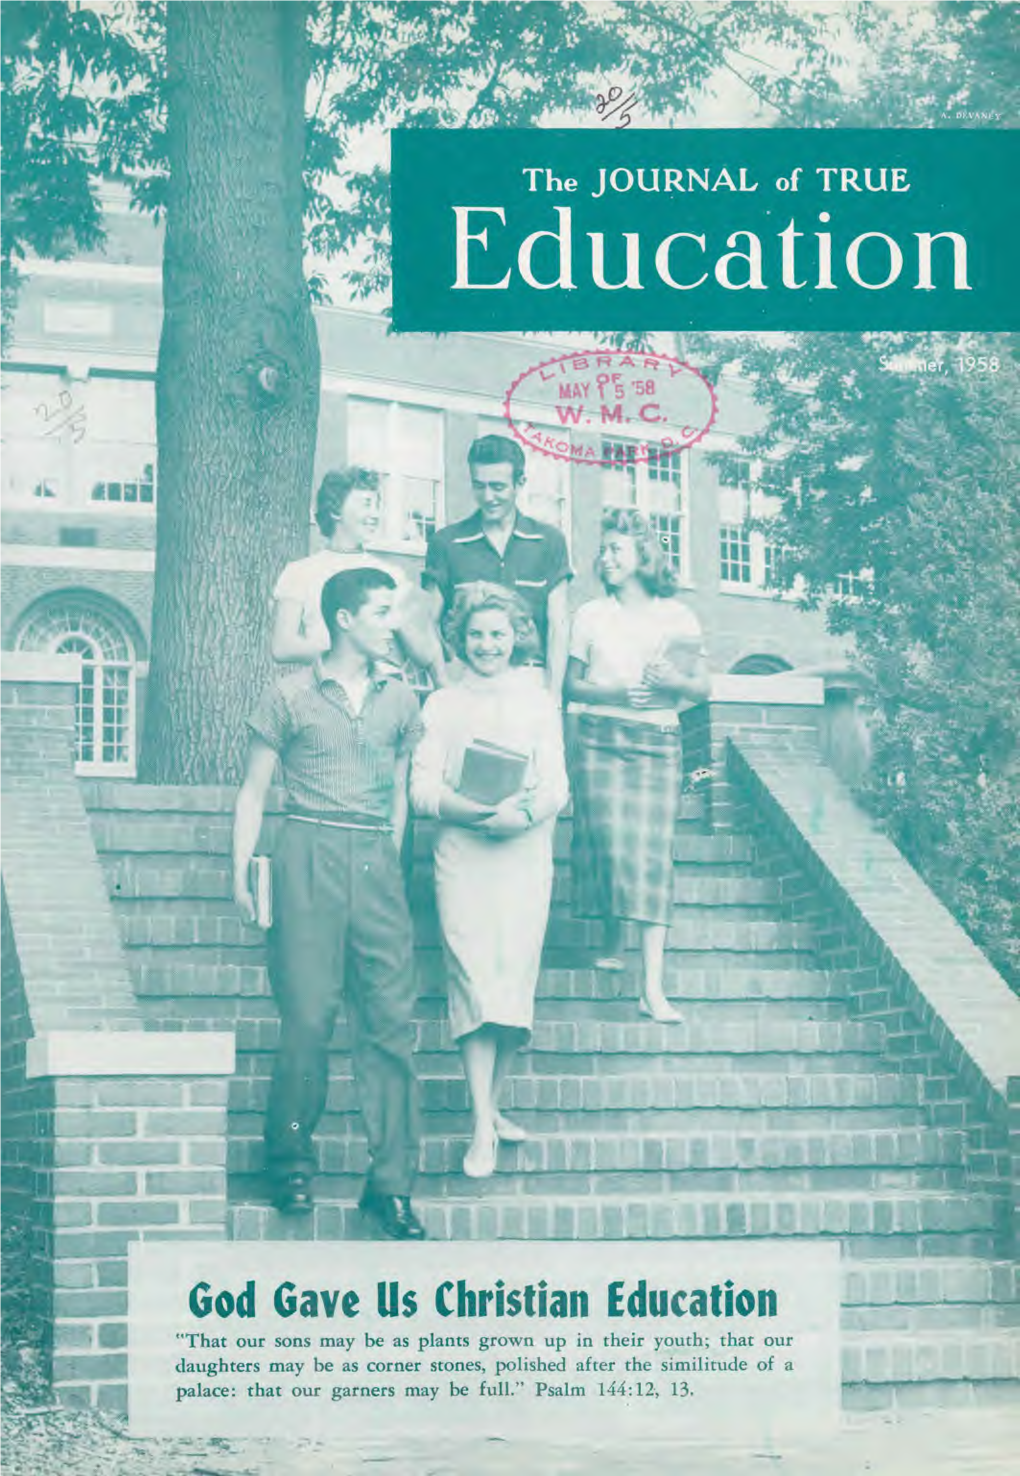 The Journal of True Education for 1958